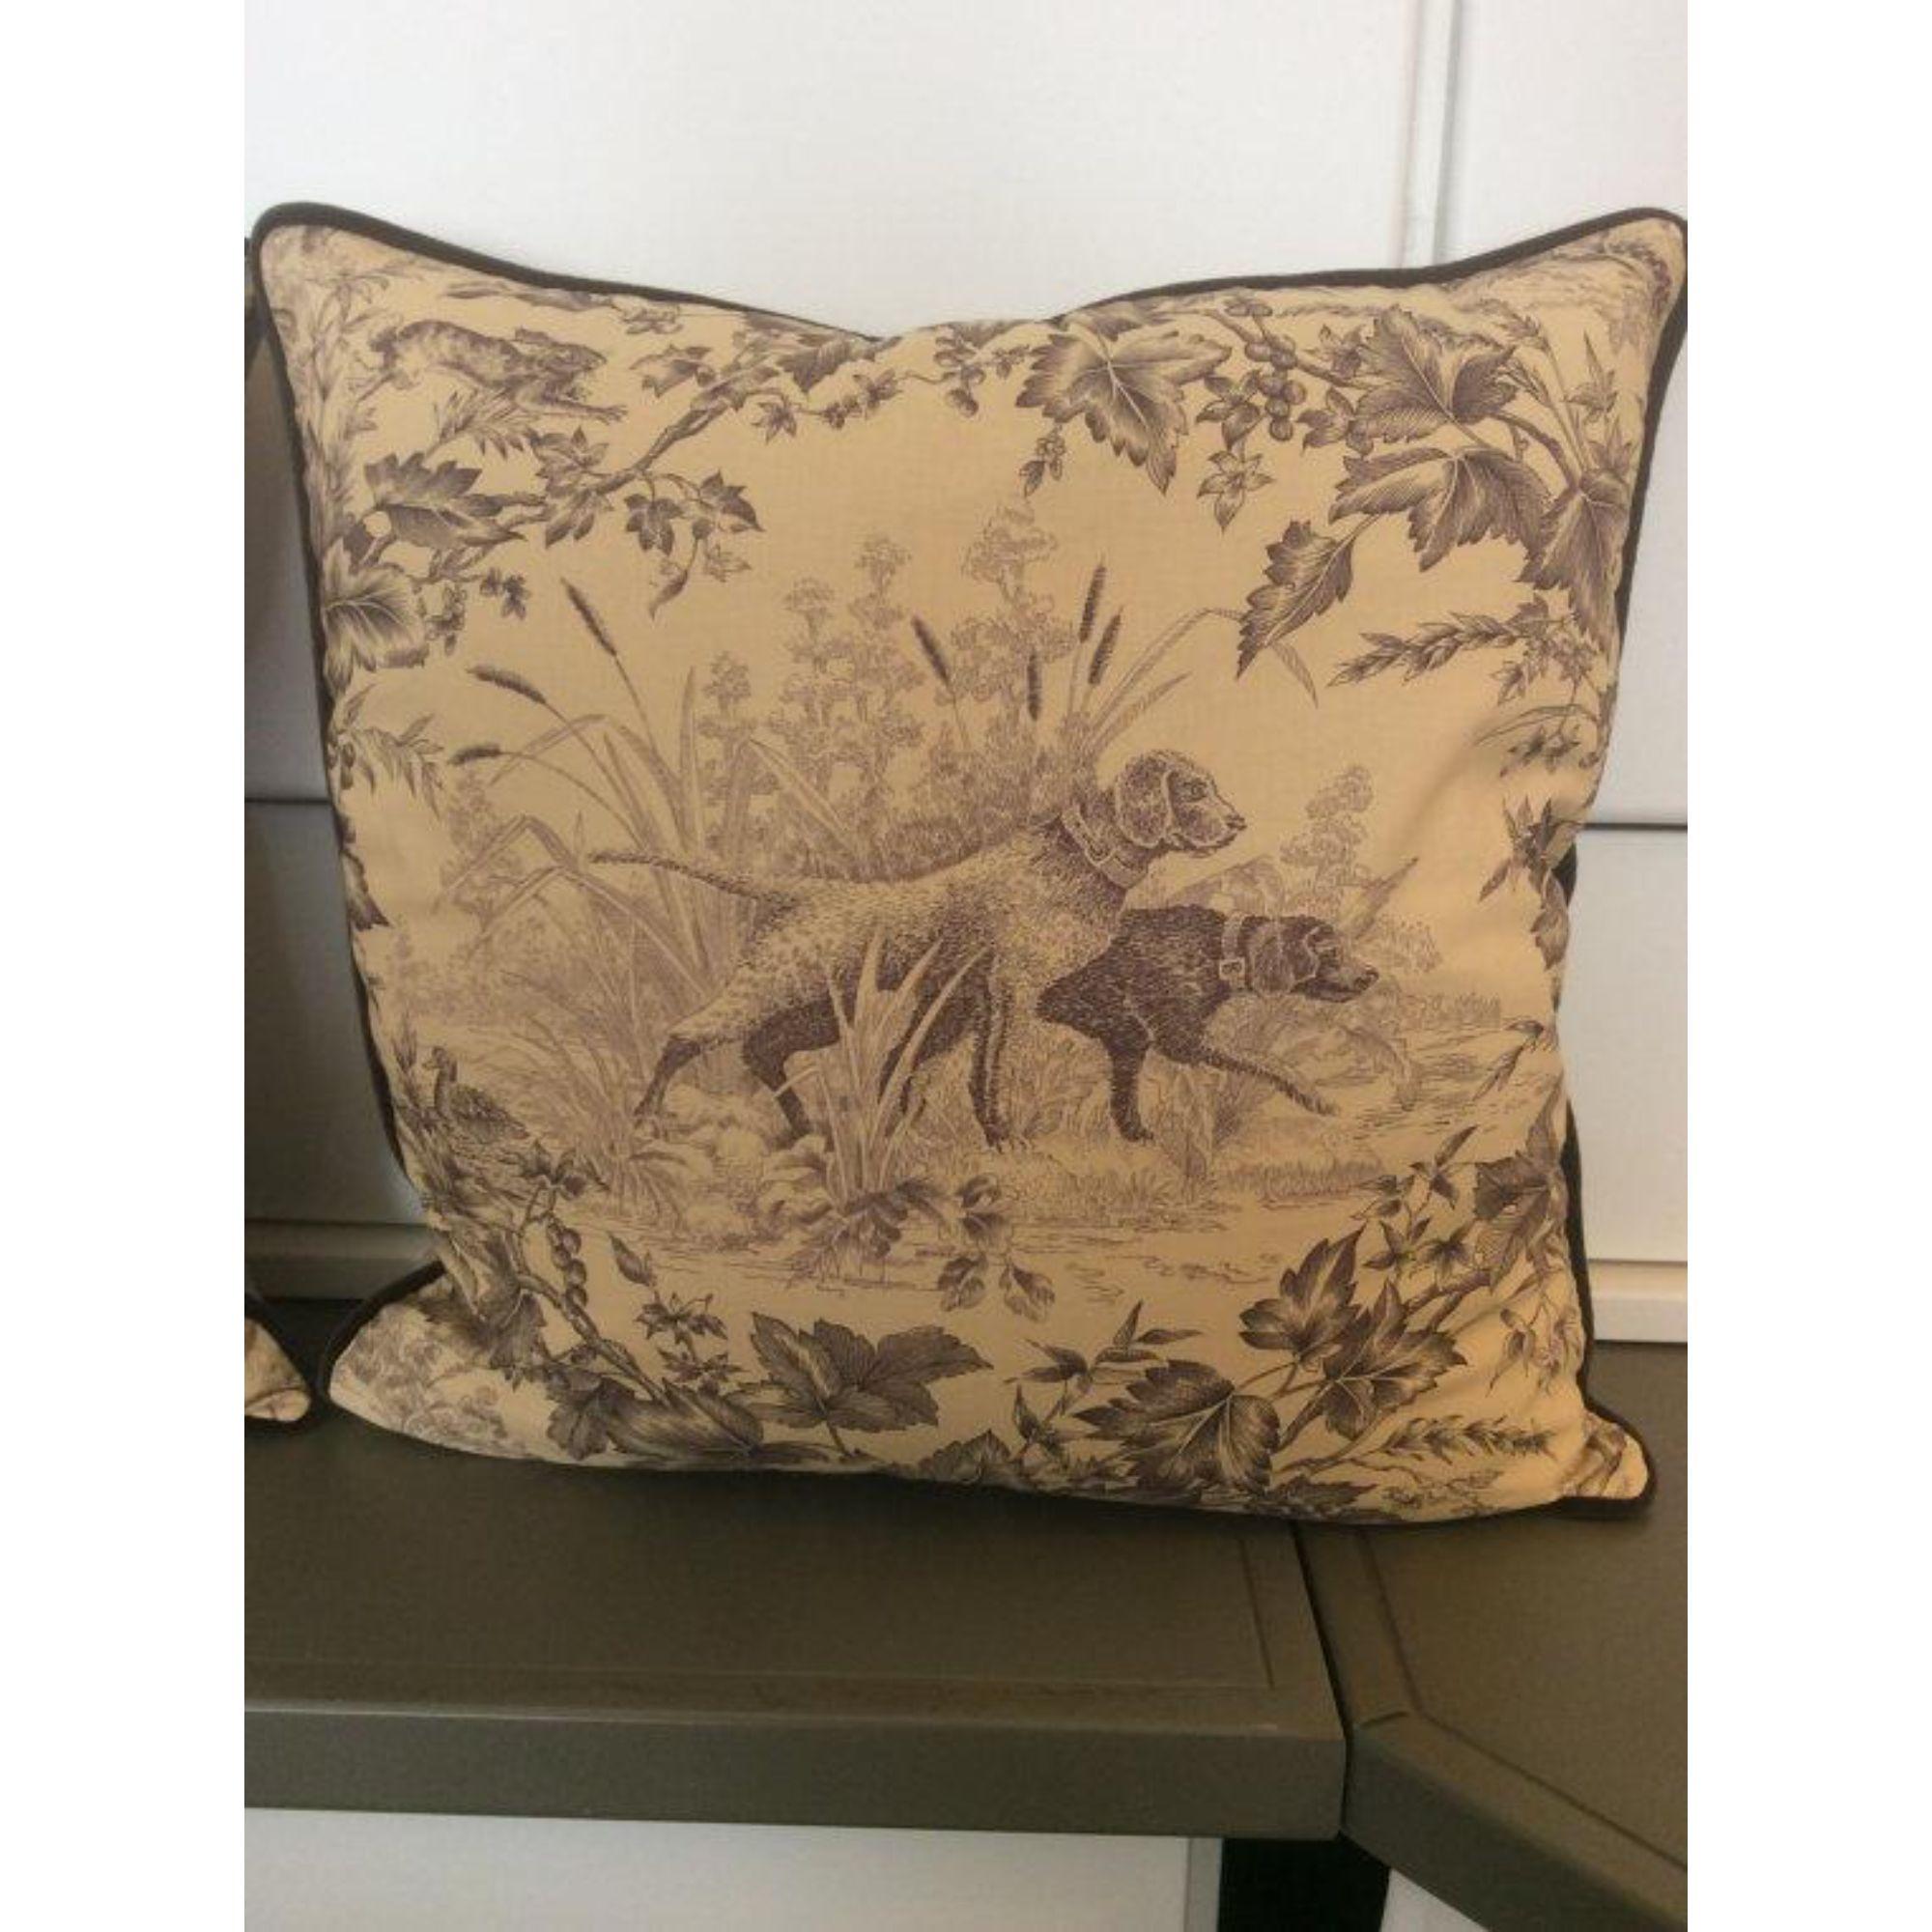 American Brunschwig & Fils Hunting Toile in Tobacco & Cream Pillows - a Pair For Sale